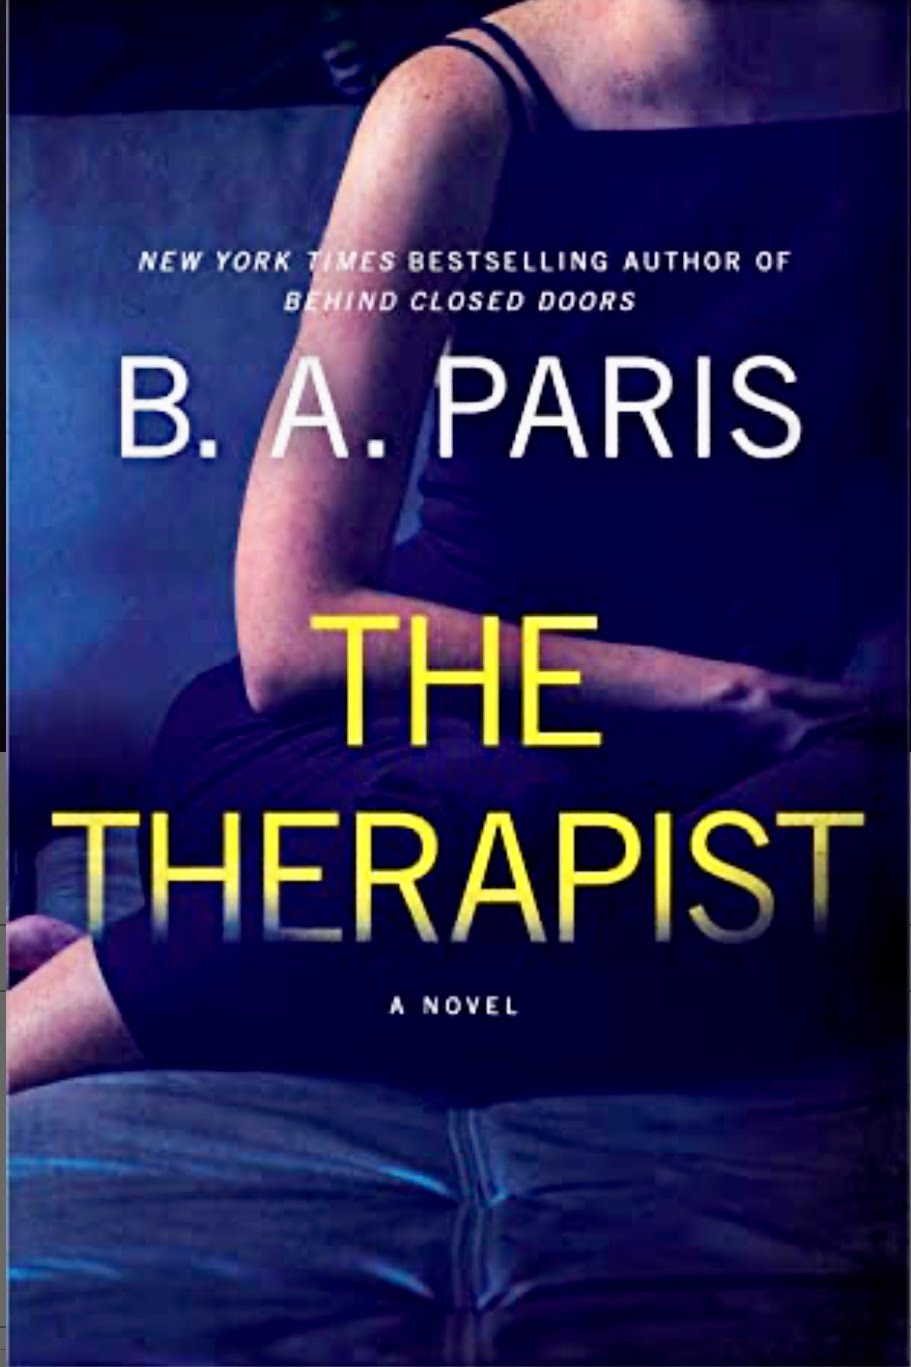 THE THERAPIST BY B.A. PARIS – BOOK REVIEW